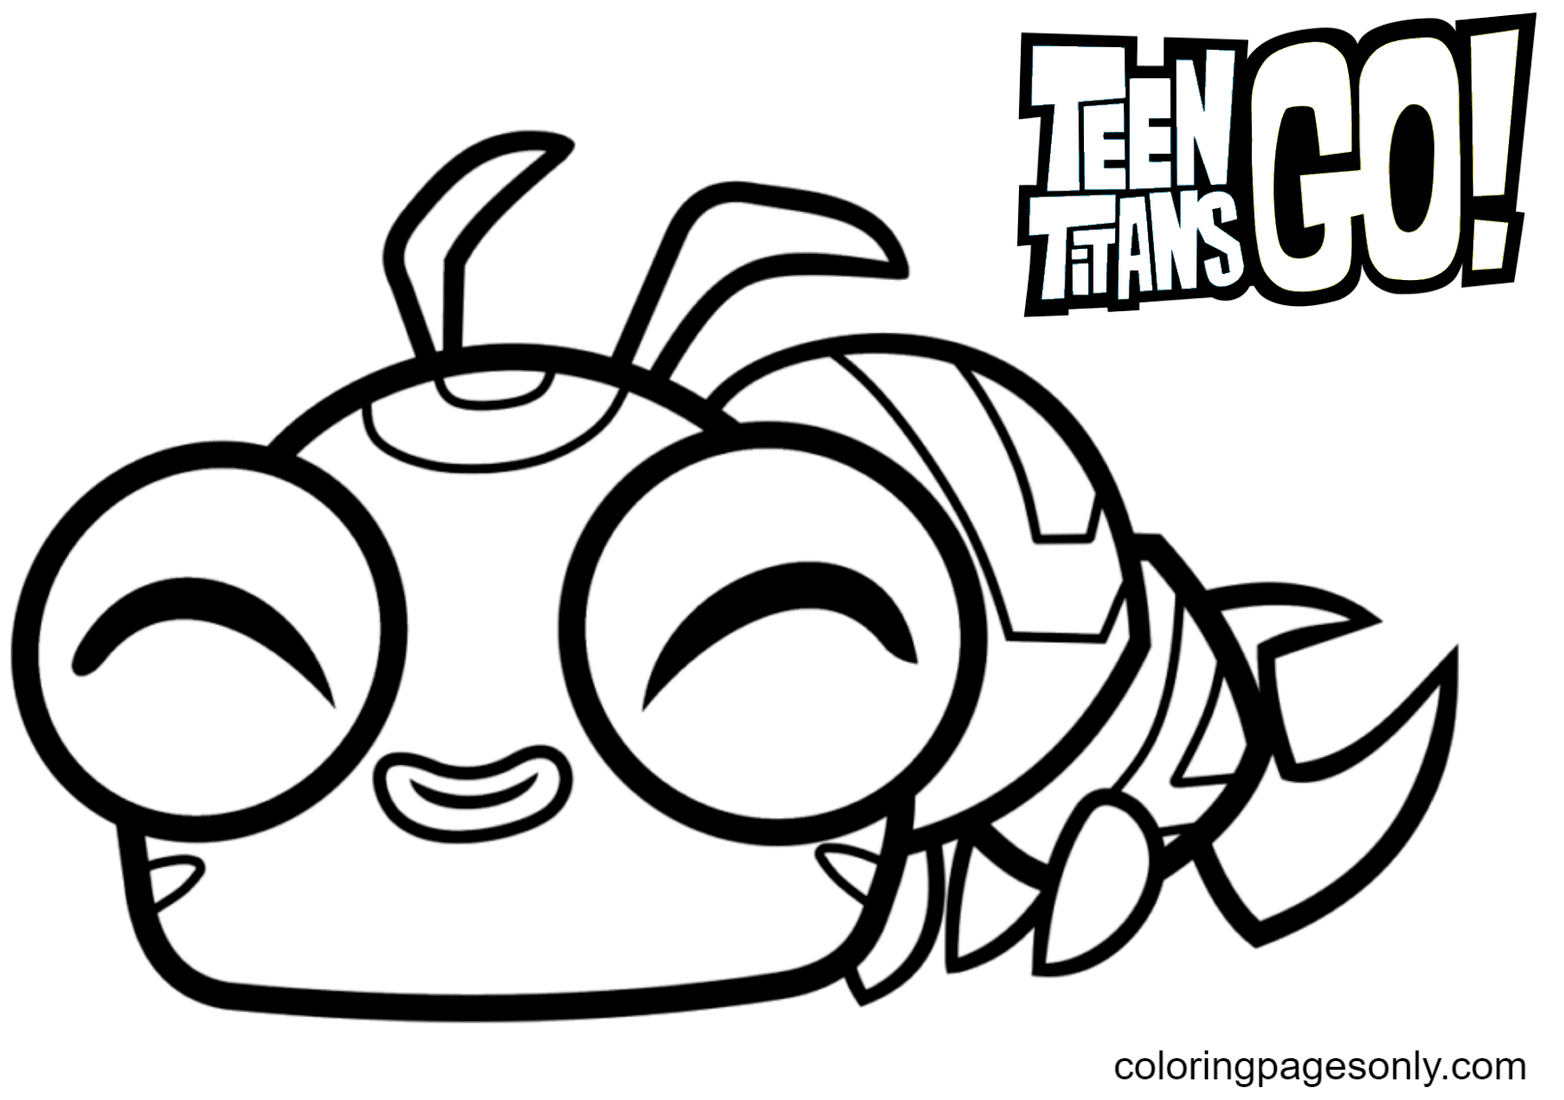 Silkie from Teen Titans Coloring Page